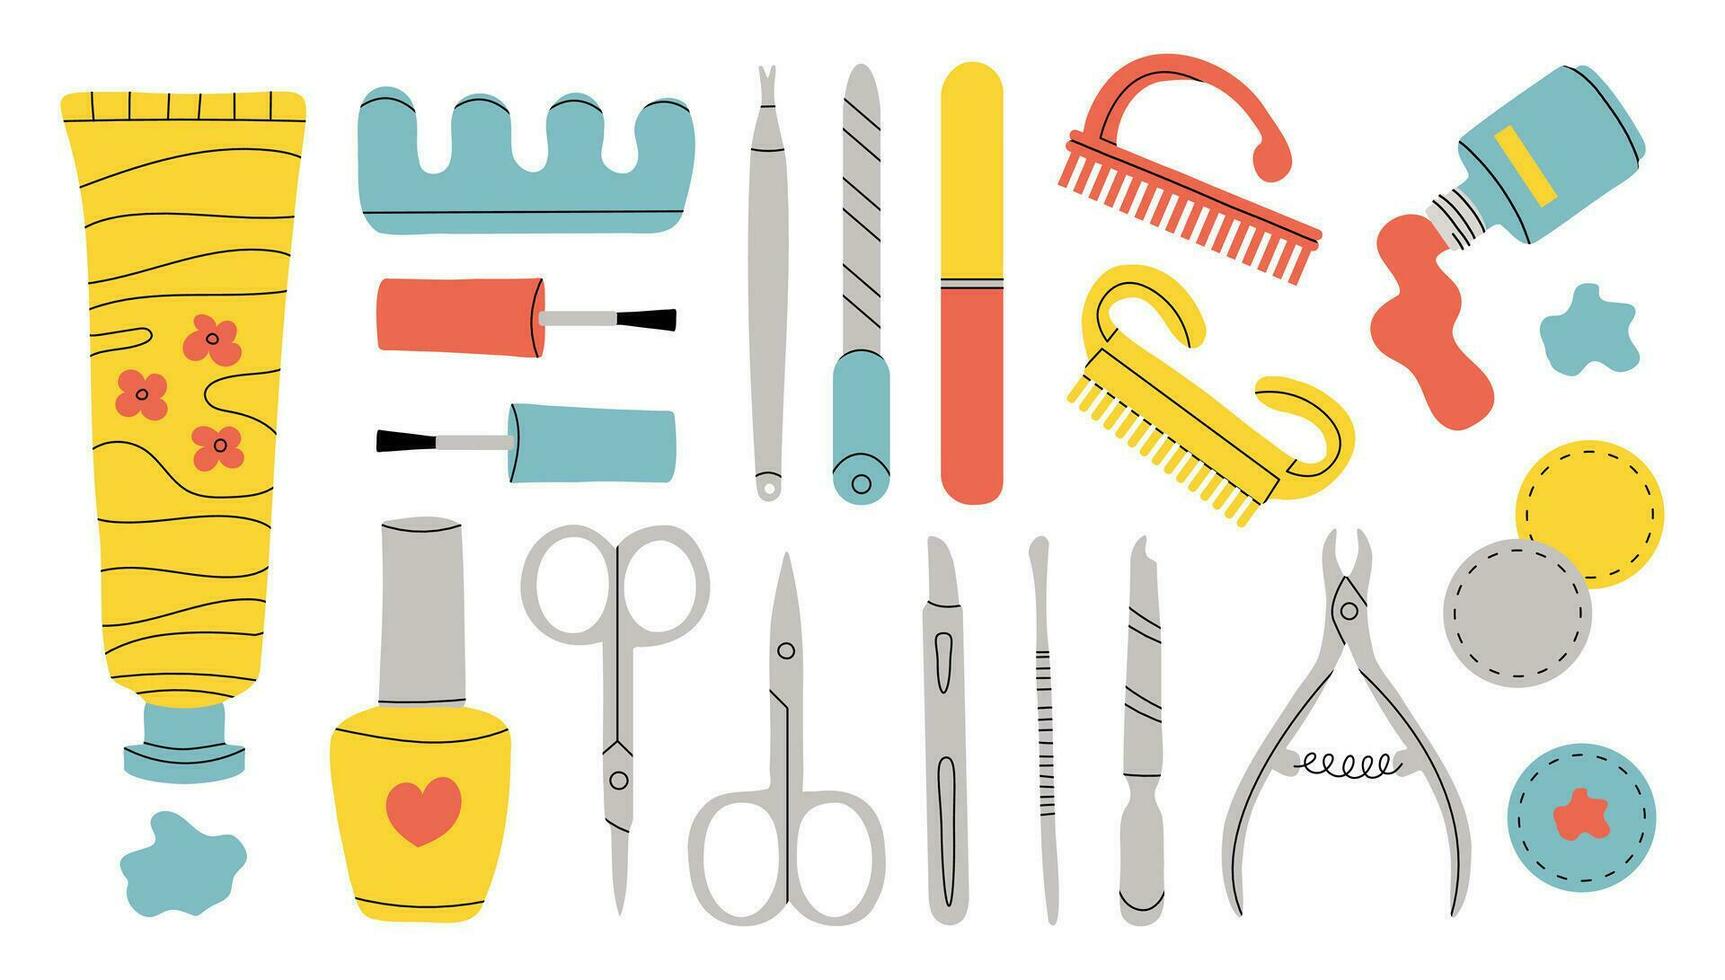 Vector set of manicure tools. Various manicure accessories. Nail scissors, nail file, tweezers, nail polish, hand cream, polish remover, brush etc. Hand-drawn style. All elements are isolated.